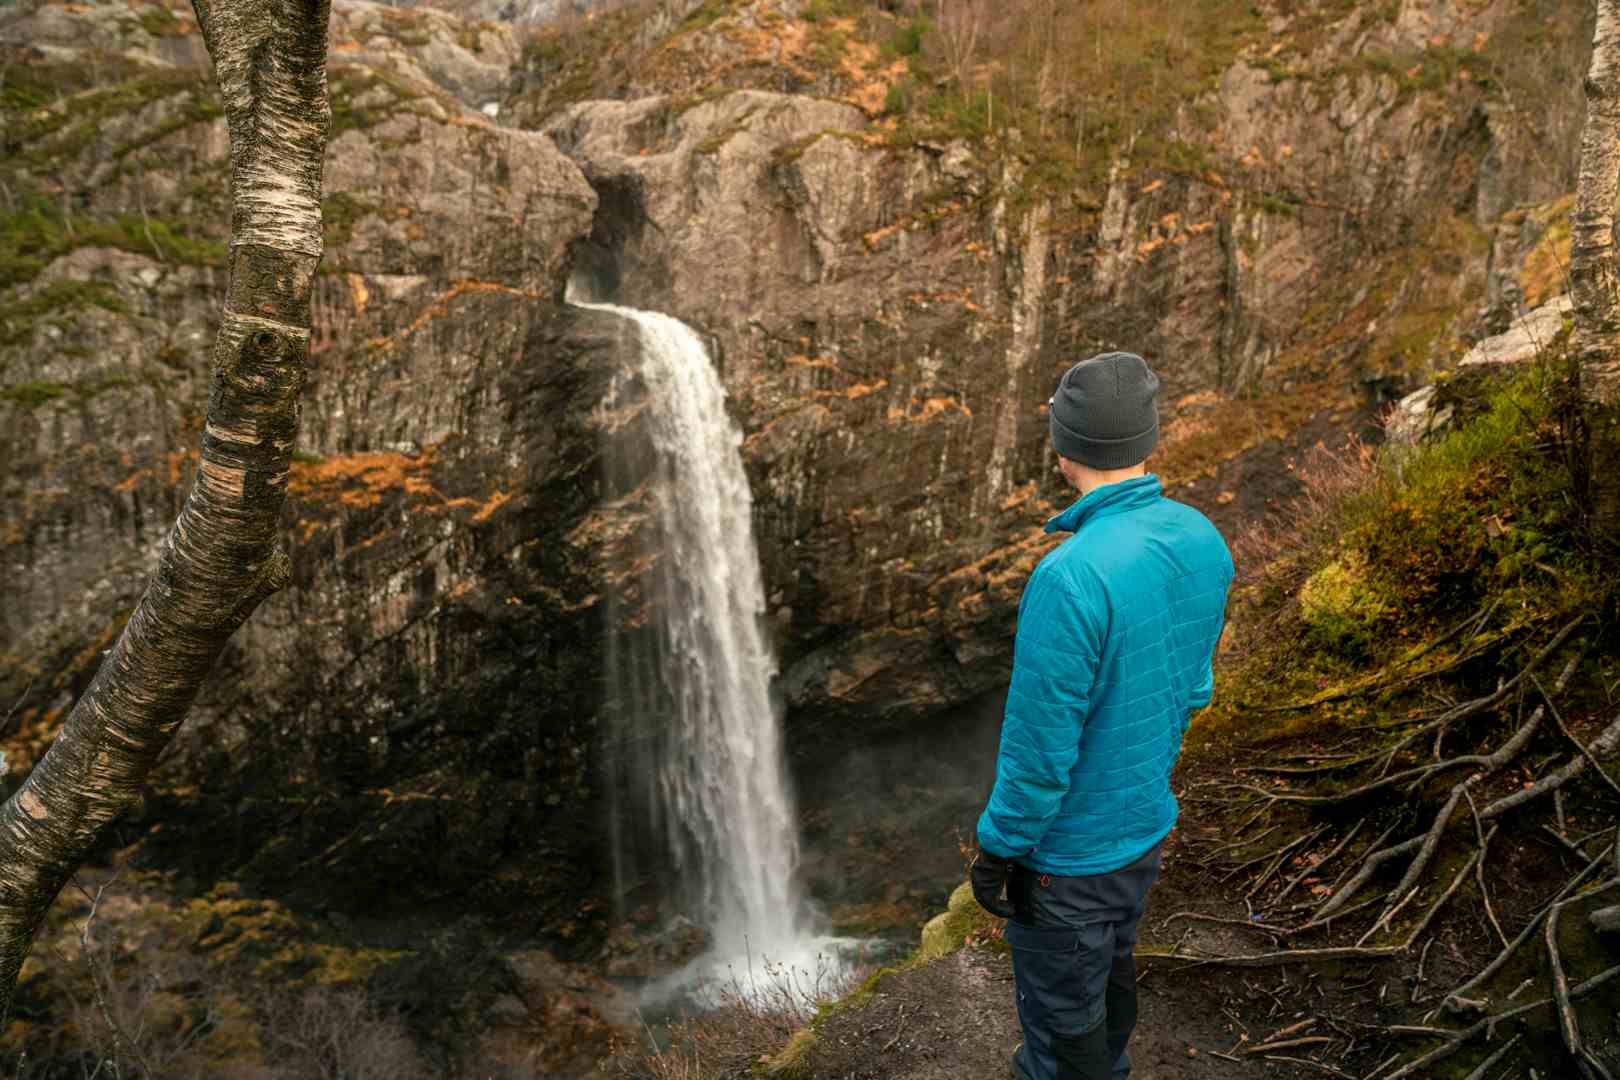 Man watching a waterfall in scenic surroundings in Norway